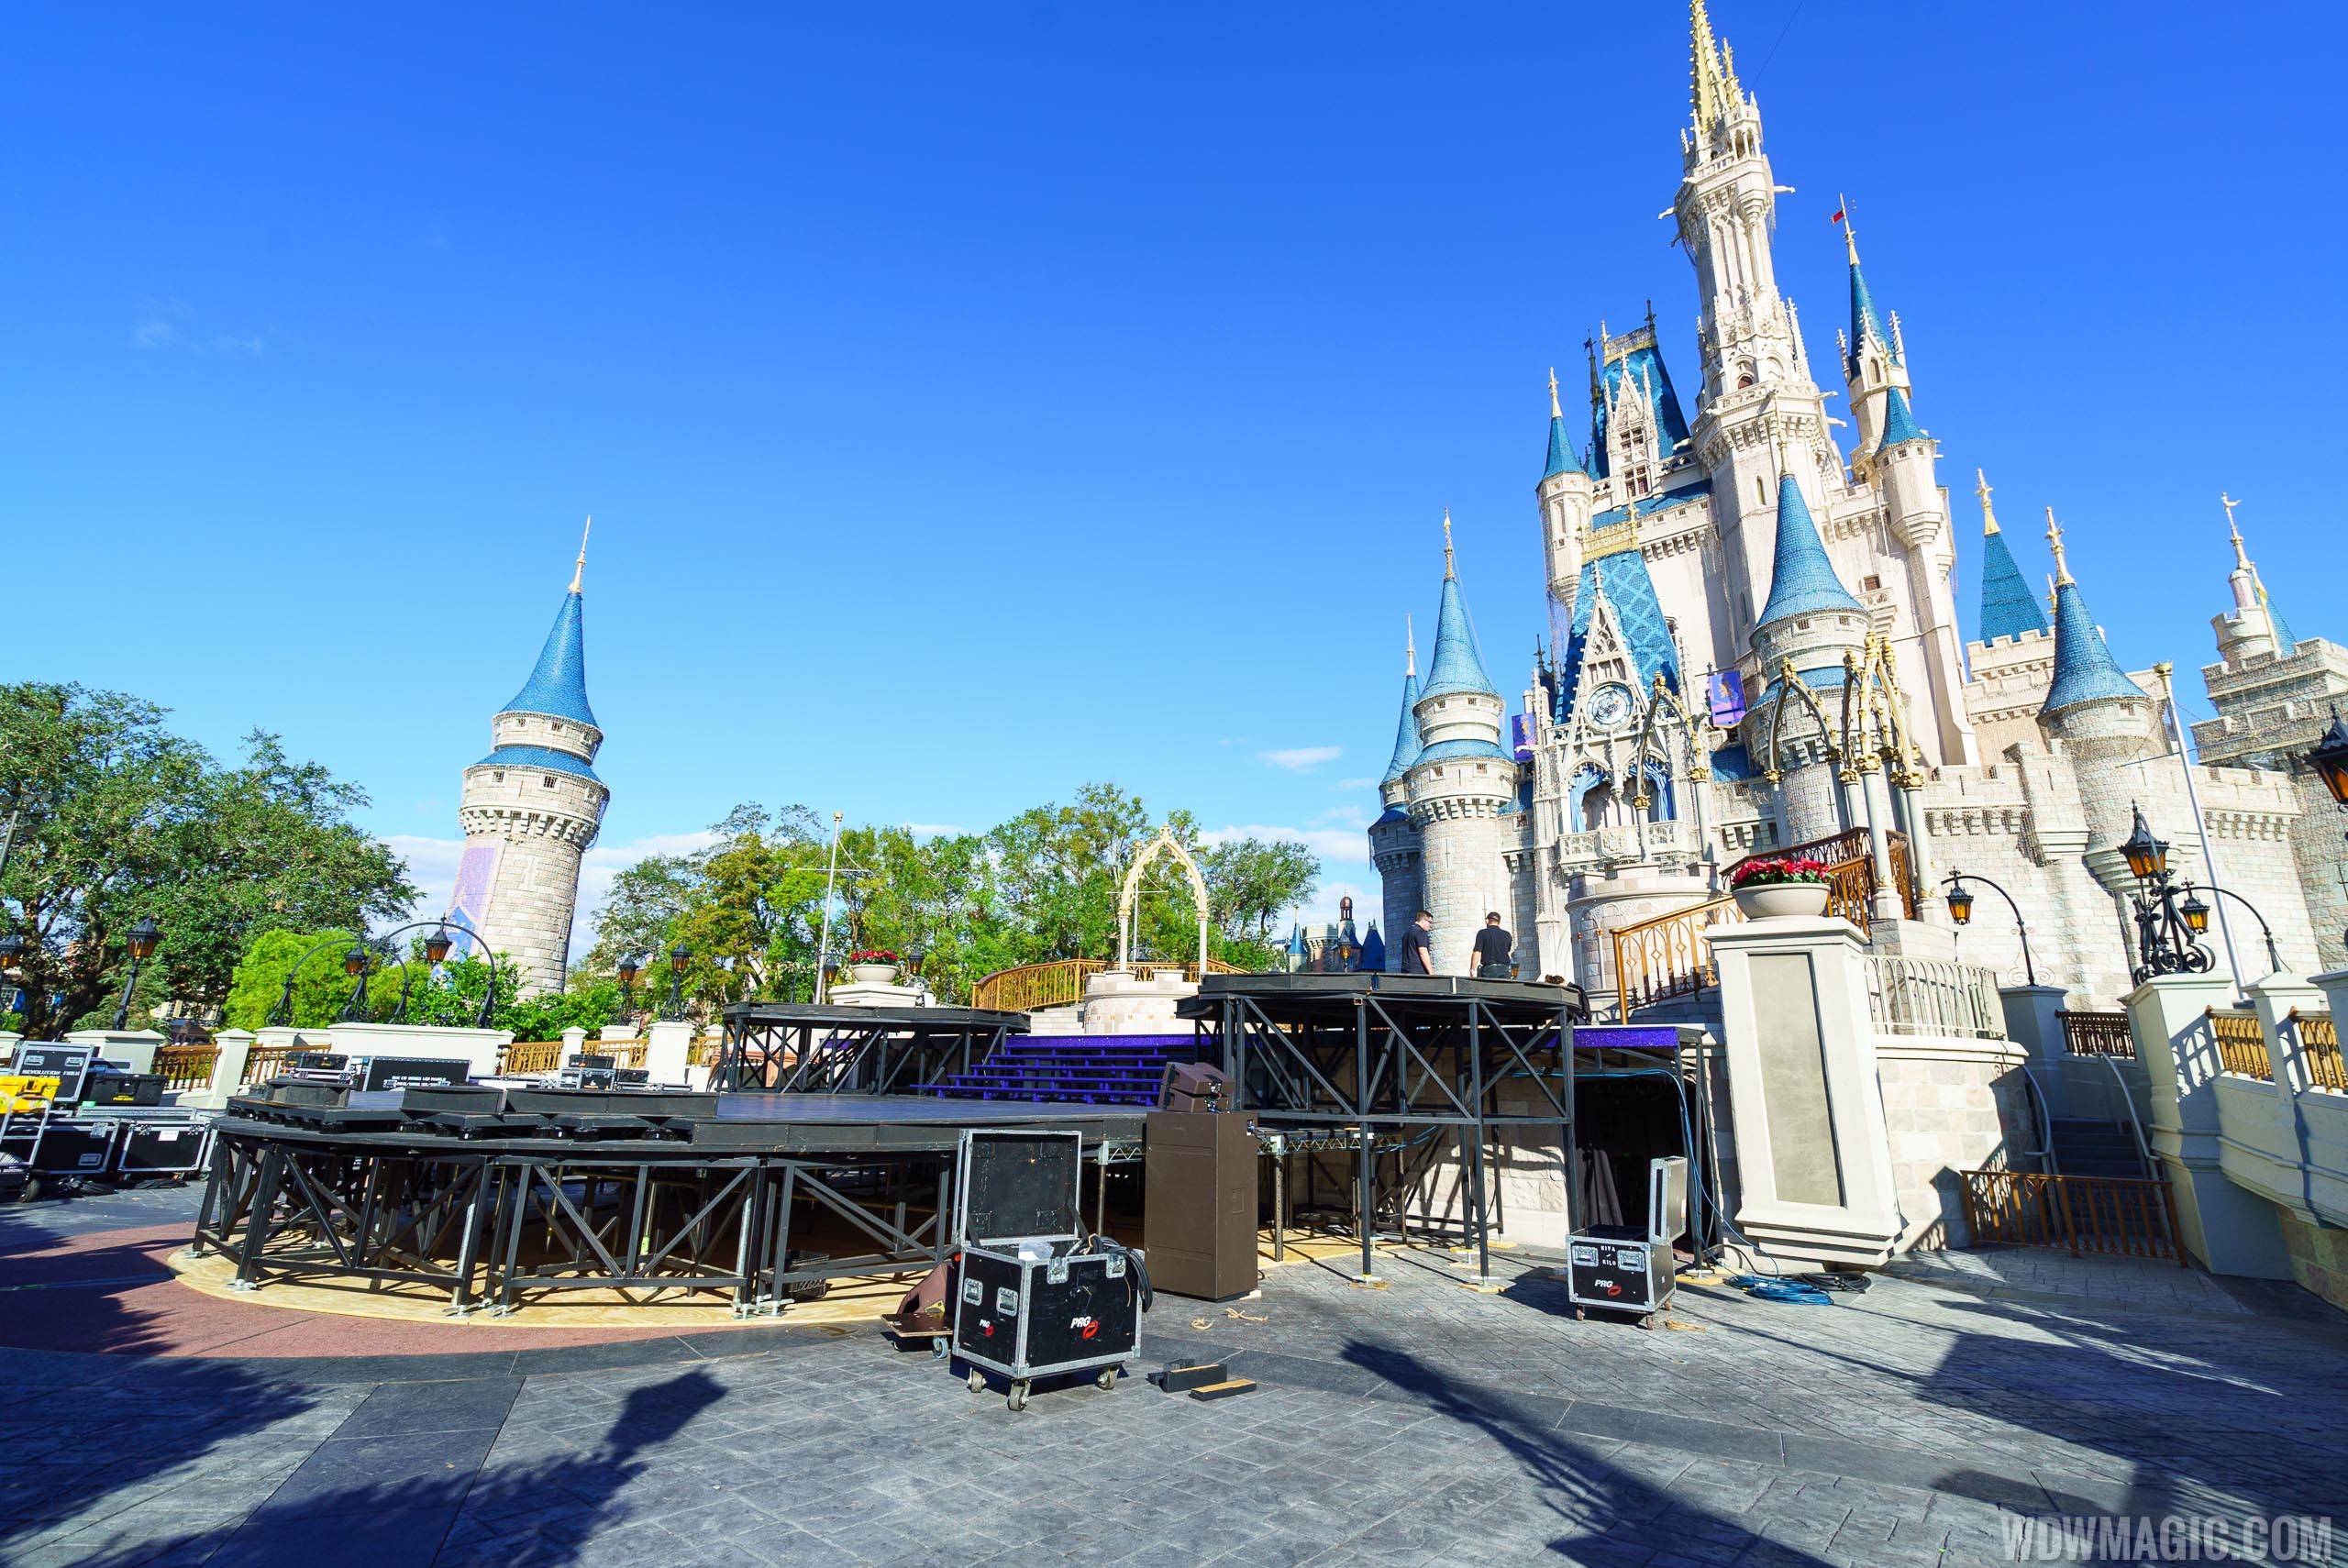 Preparations for the ABC TV specials at the Magic Kingdom